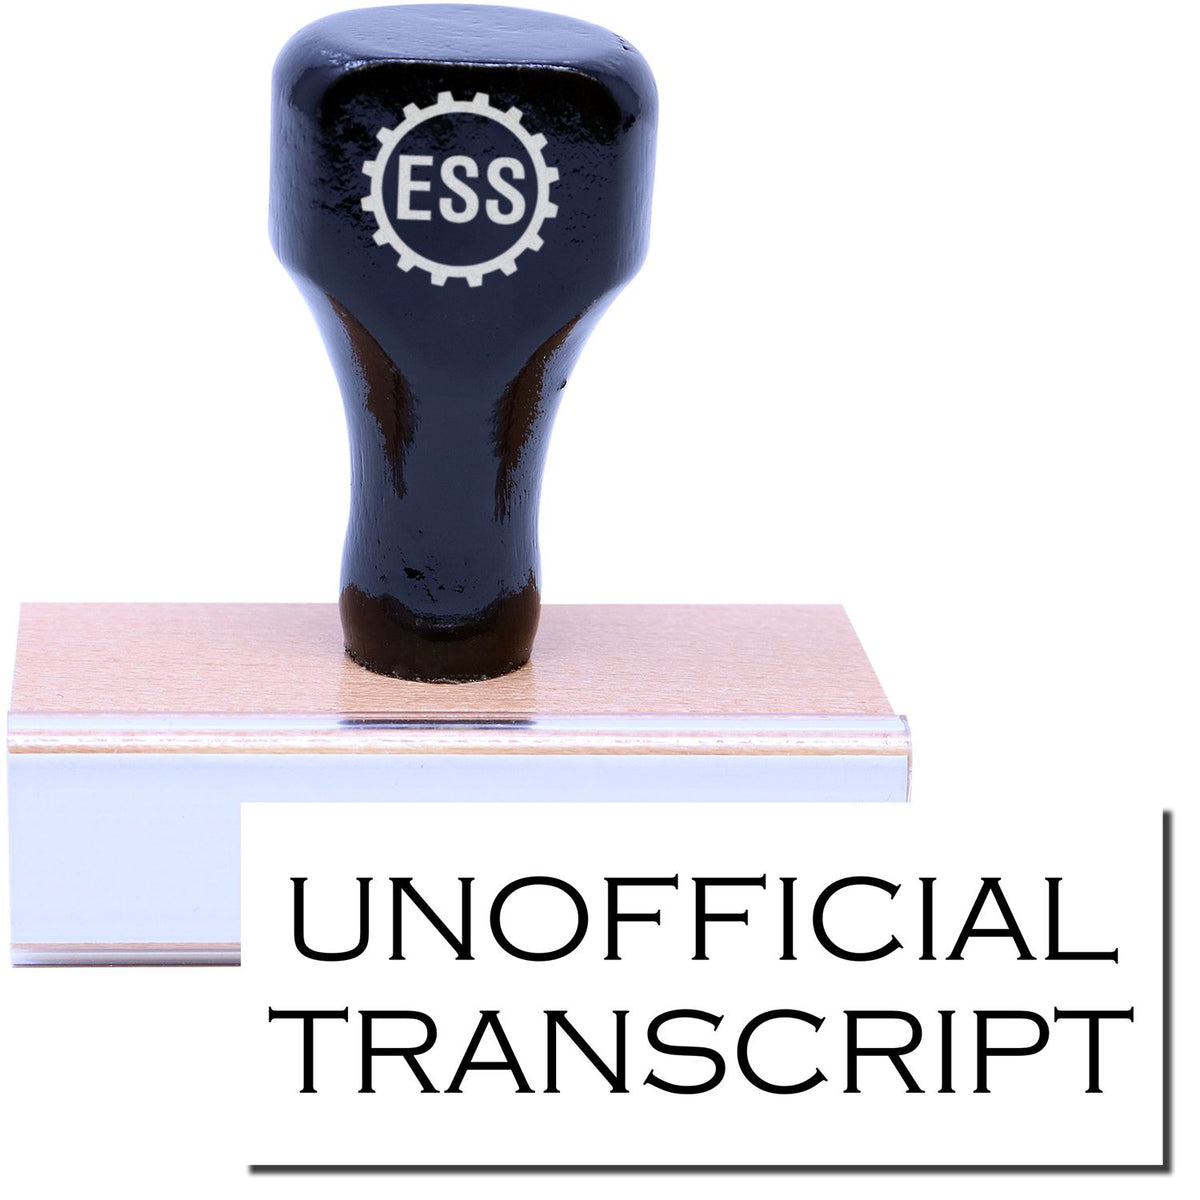 A stock office rubber stamp with a stamped image showing how the text &quot;UNOFFICIAL TRANSCRIPT&quot; is displayed after stamping.